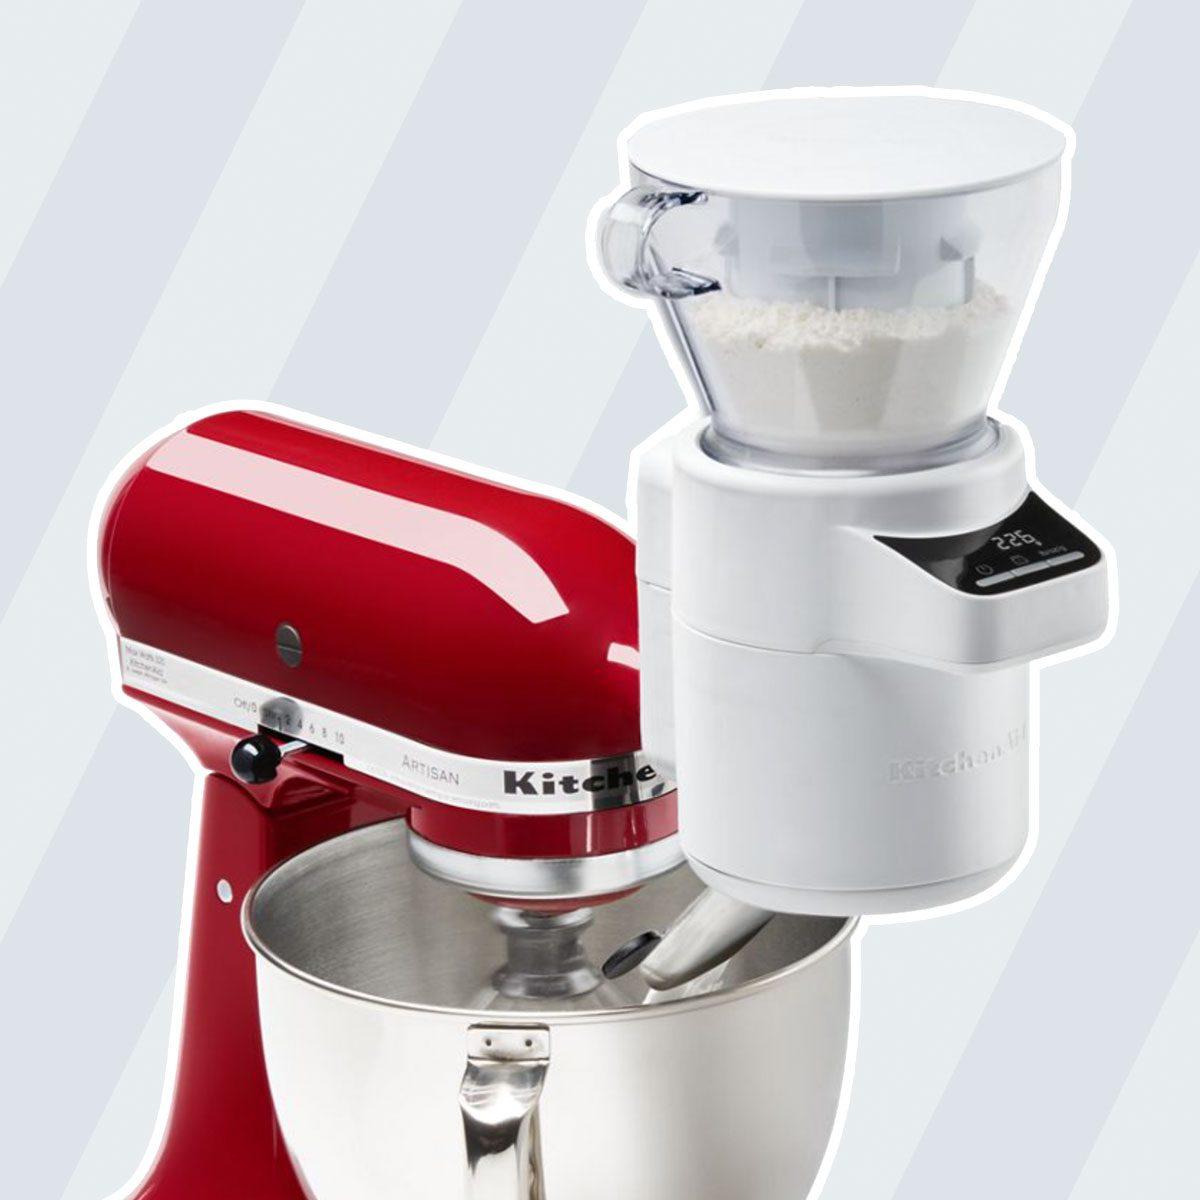 The Best KitchenAid Stand Mixer Accessories for Bakers